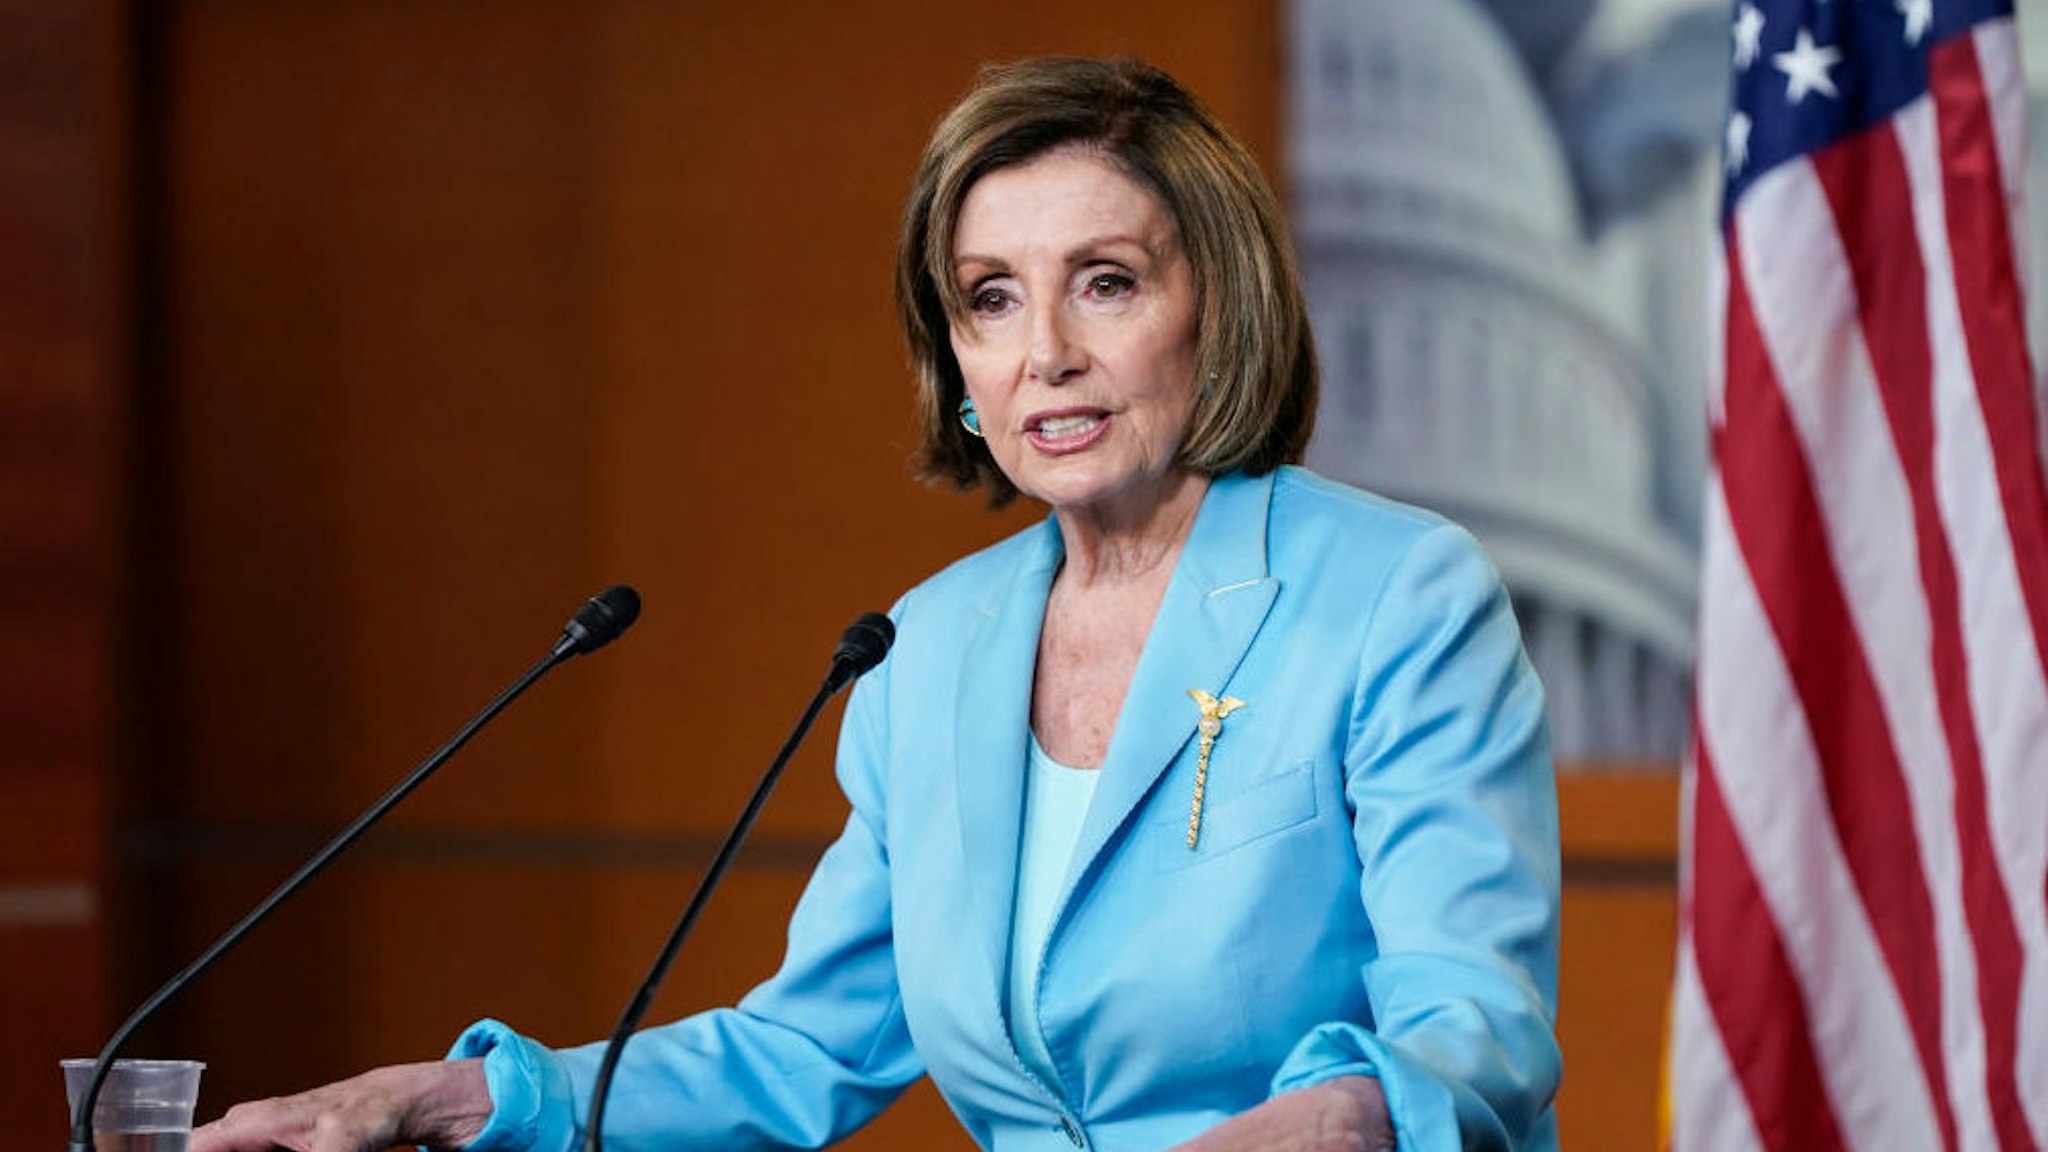 WASHINGTON, DC - JUNE 17: Speaker of the House Nancy Pelosi (D-CA) speaks during her weekly media availability on Capitol Hill on June 17, 2021 in Washington, DC. Pelosi expressed her support for the Supreme Court decision upholding the Affordable Care Act and called on Congress to pass H.R. 1, a bill to expand and protect voting rights.